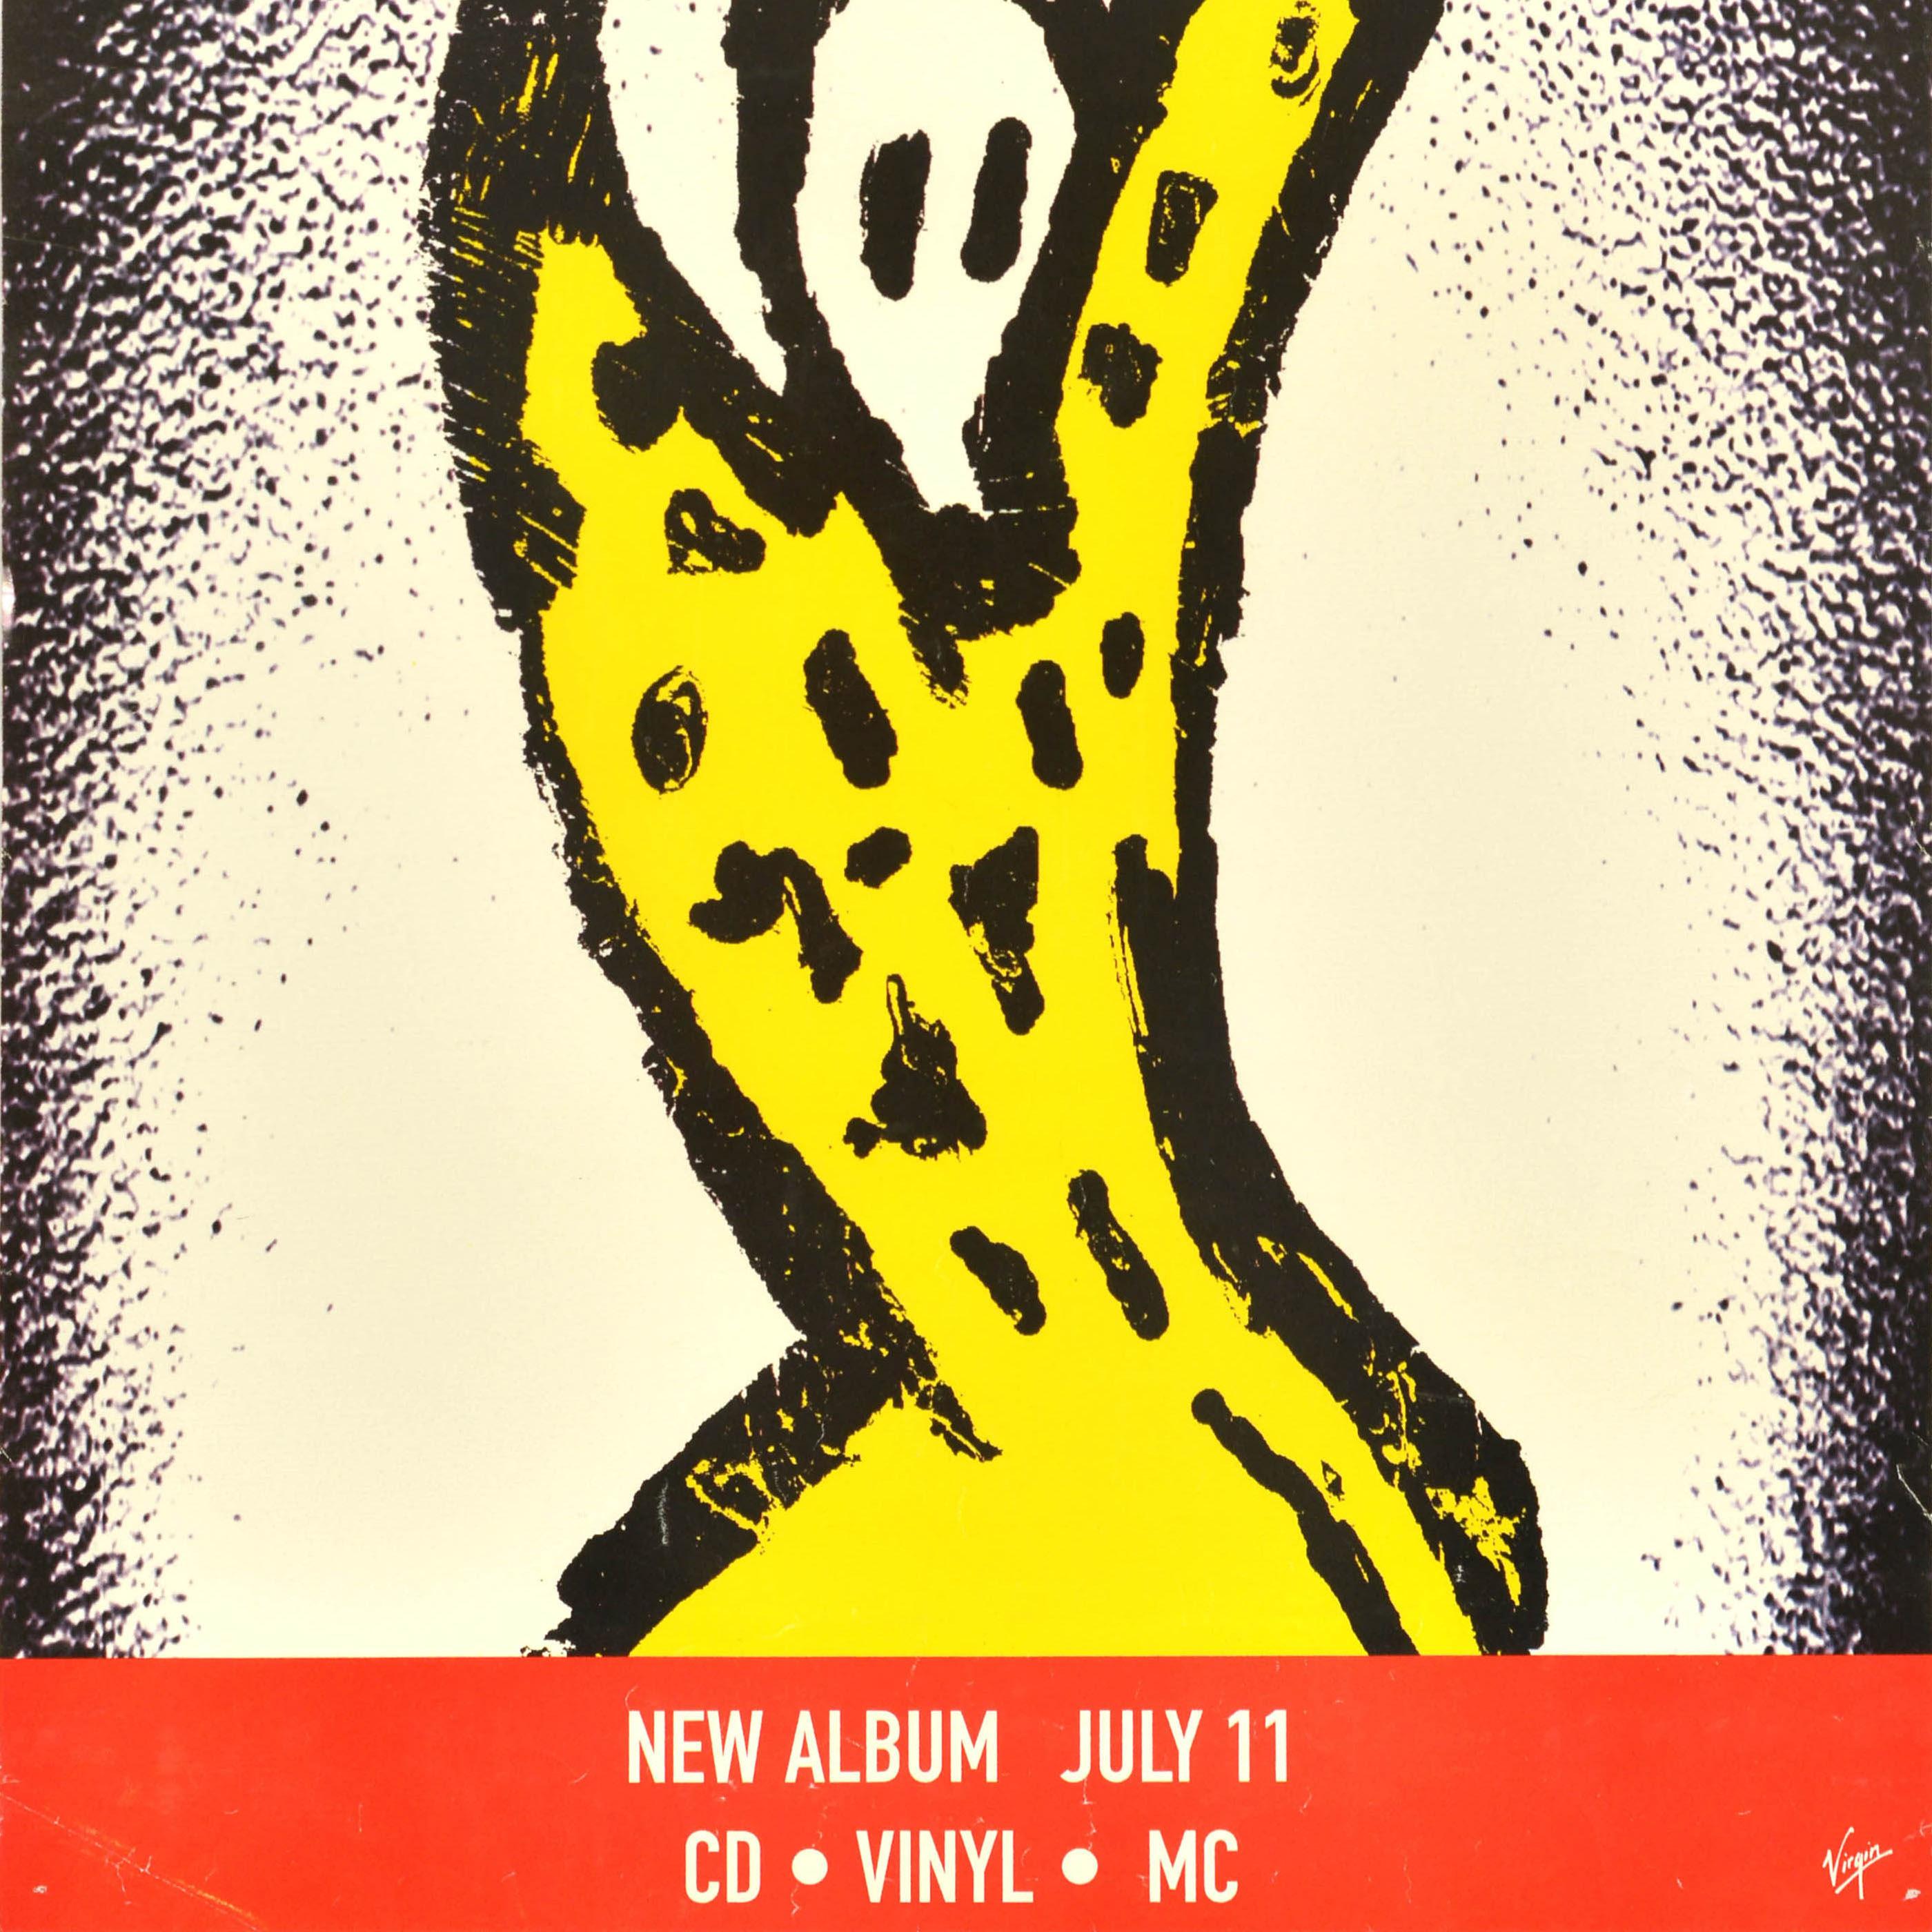 Original vintage music advertising poster for the Rolling Stones Voodoo Lounge album featuring a design by band member Keith Richards depicting a silhouette figure in yellow and black with the title text above and information on the New Album